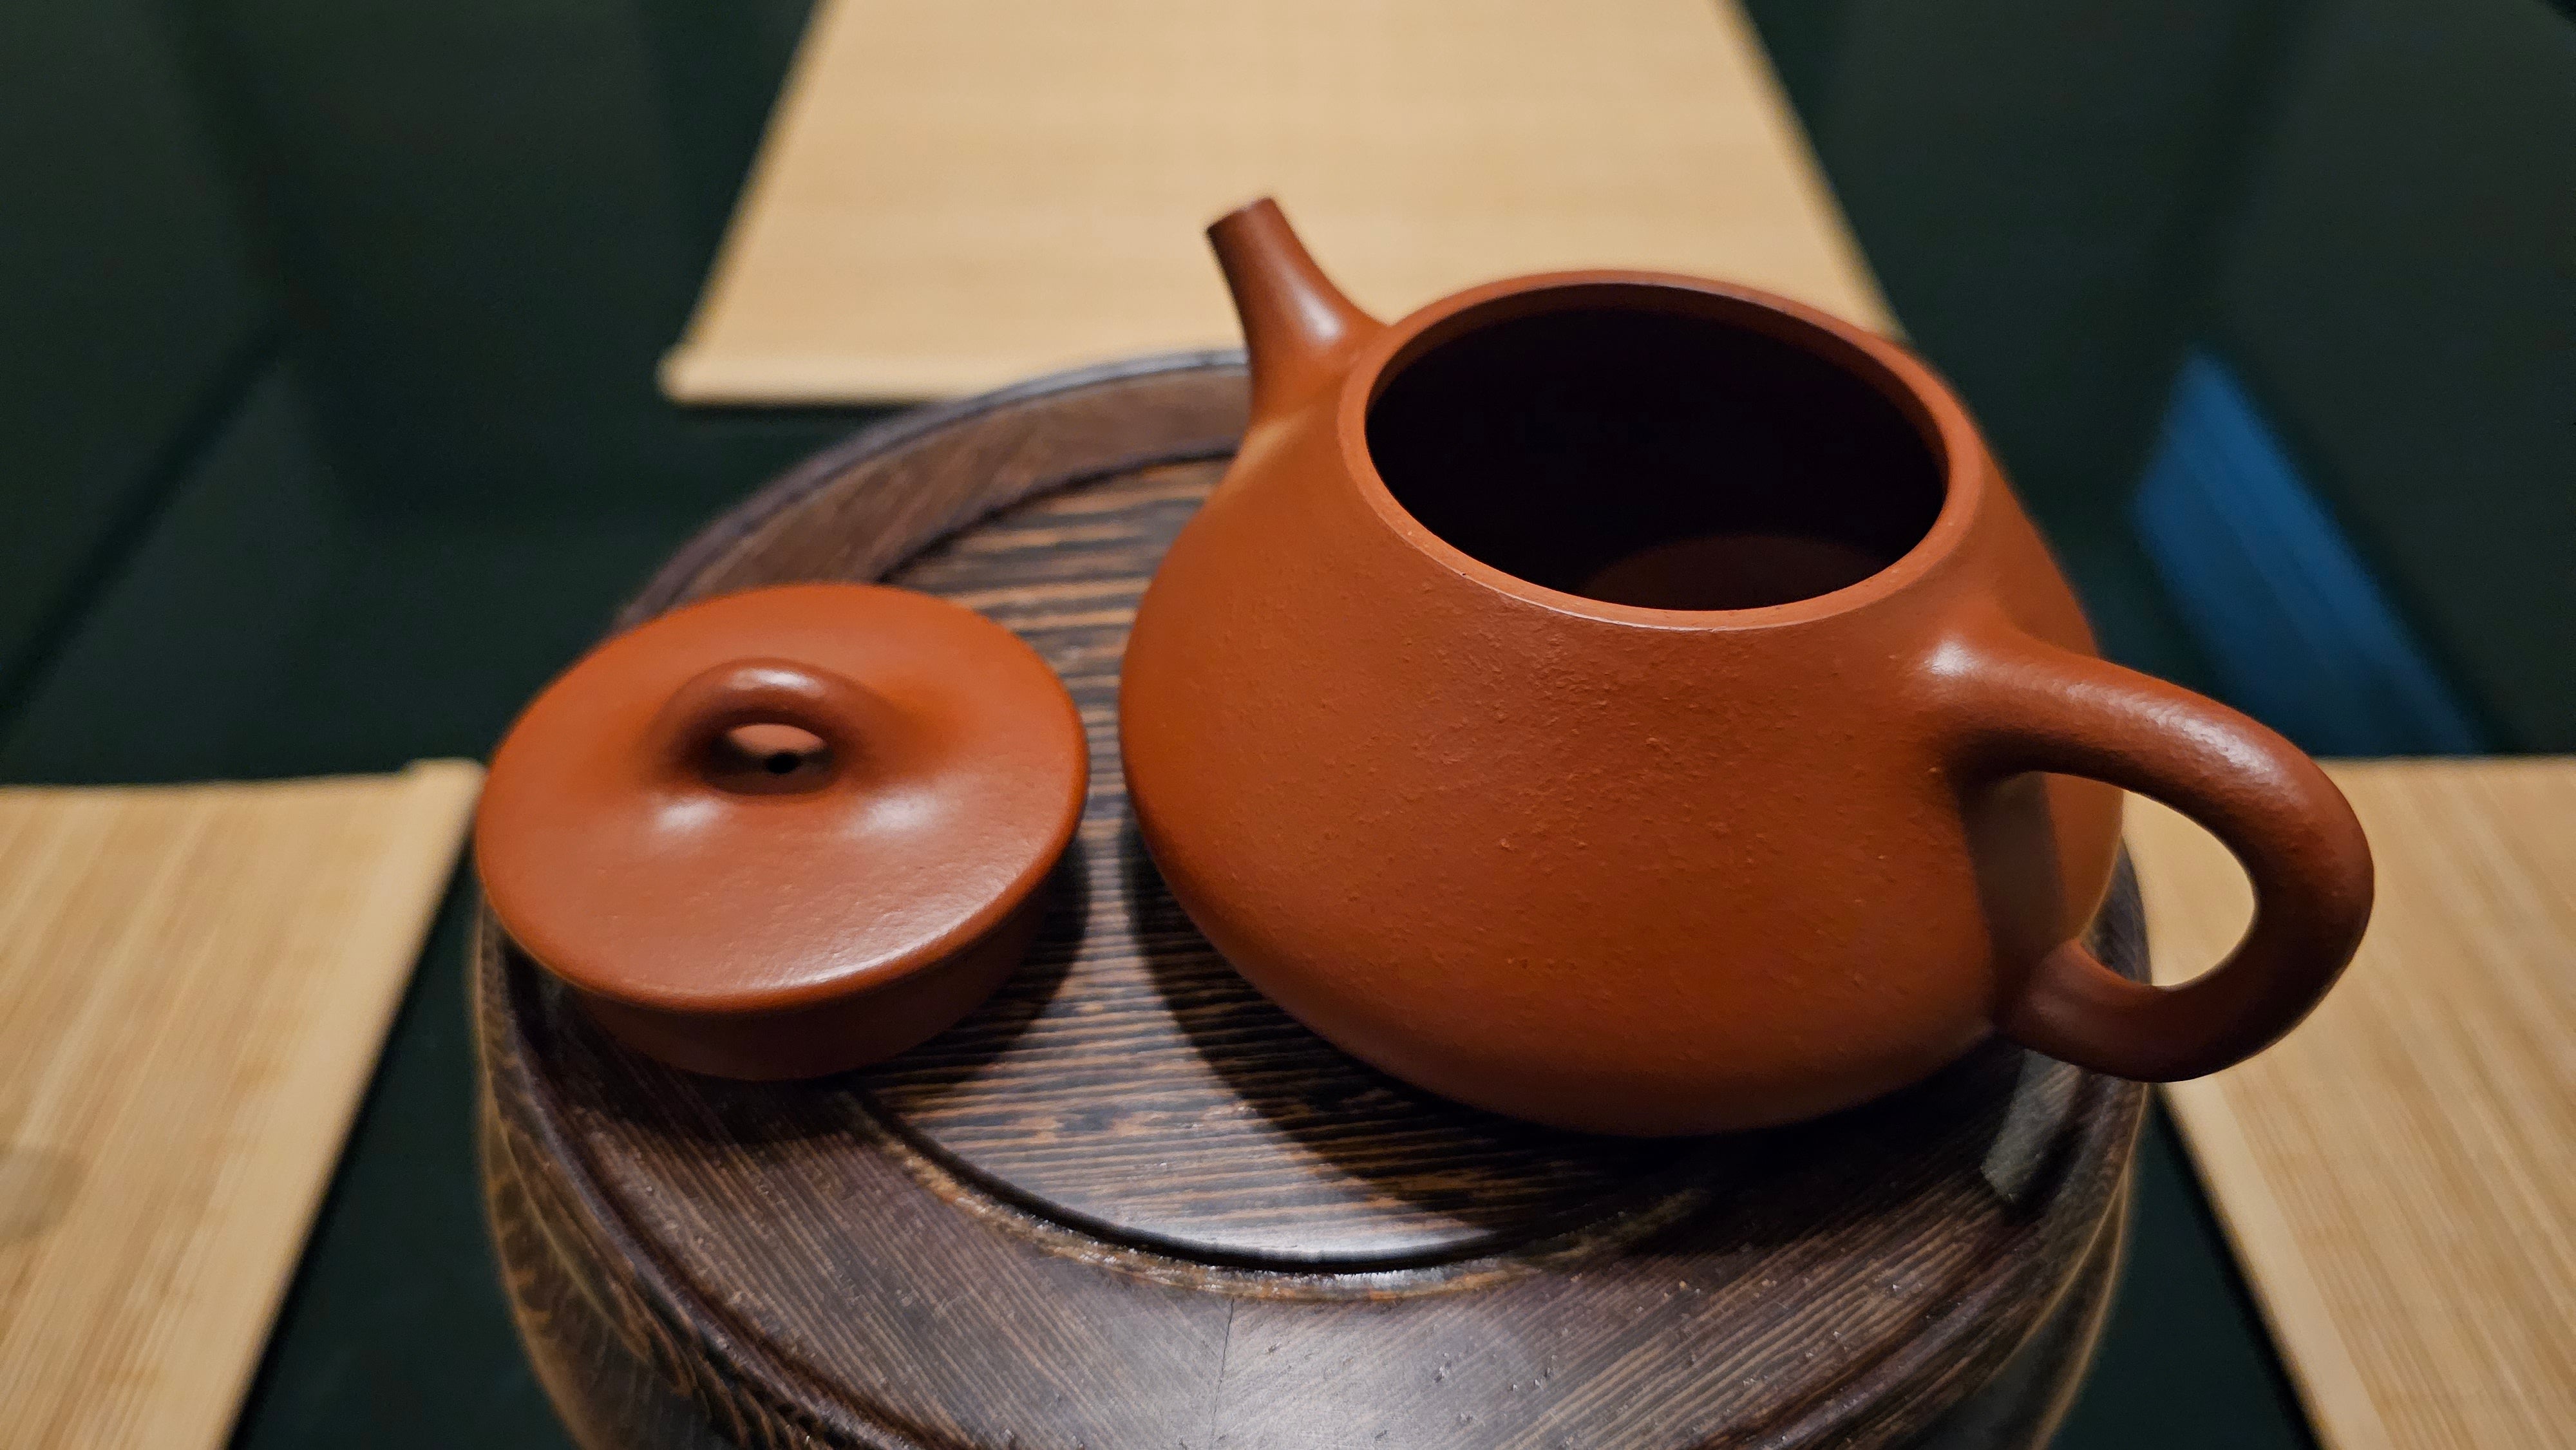 Ping Gai Shi Piao 平盖石瓢, Yuan Kuang Da Hong Pao 原矿大红袍, made by L2 Senior Master Cao Lan Fang 国家高级工艺美术师～曹兰芳。- commissioned in Jan 2022 for our esteemed Patron Dr Lin (Singapore), Shown here for viewing.